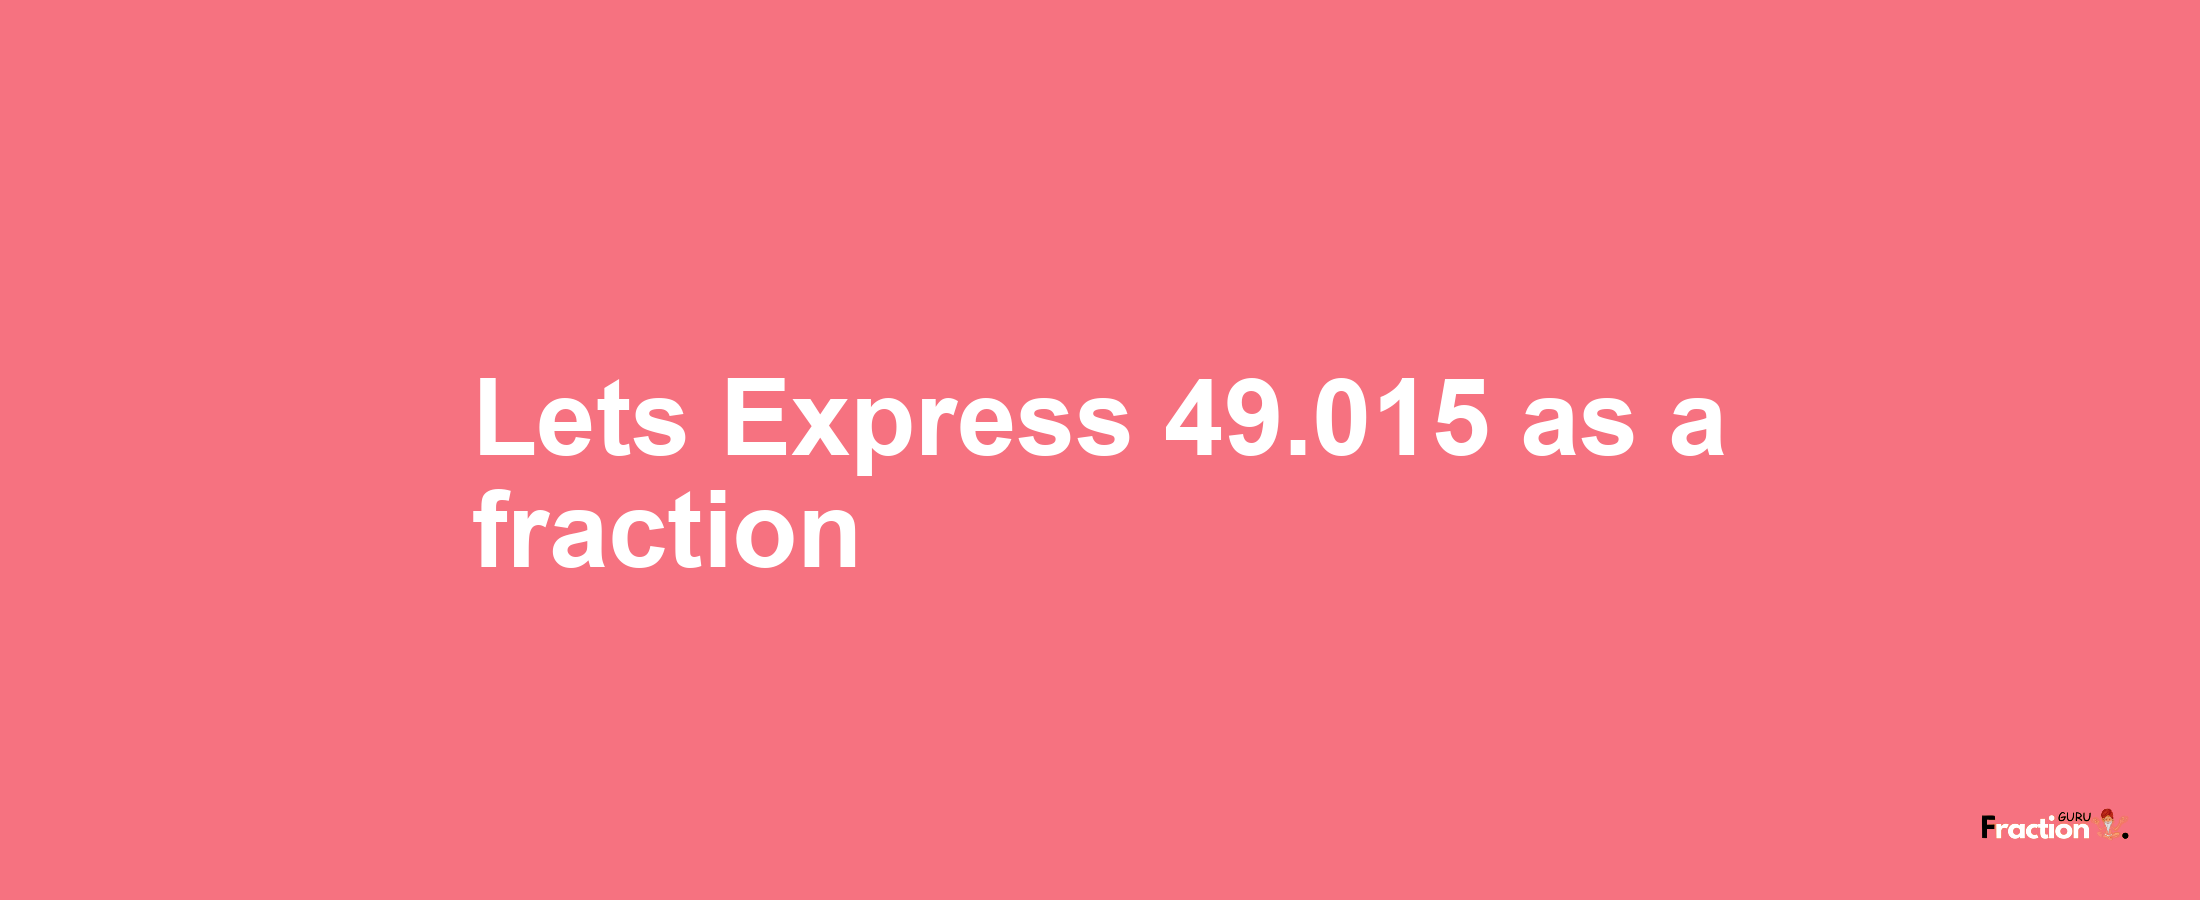 Lets Express 49.015 as afraction